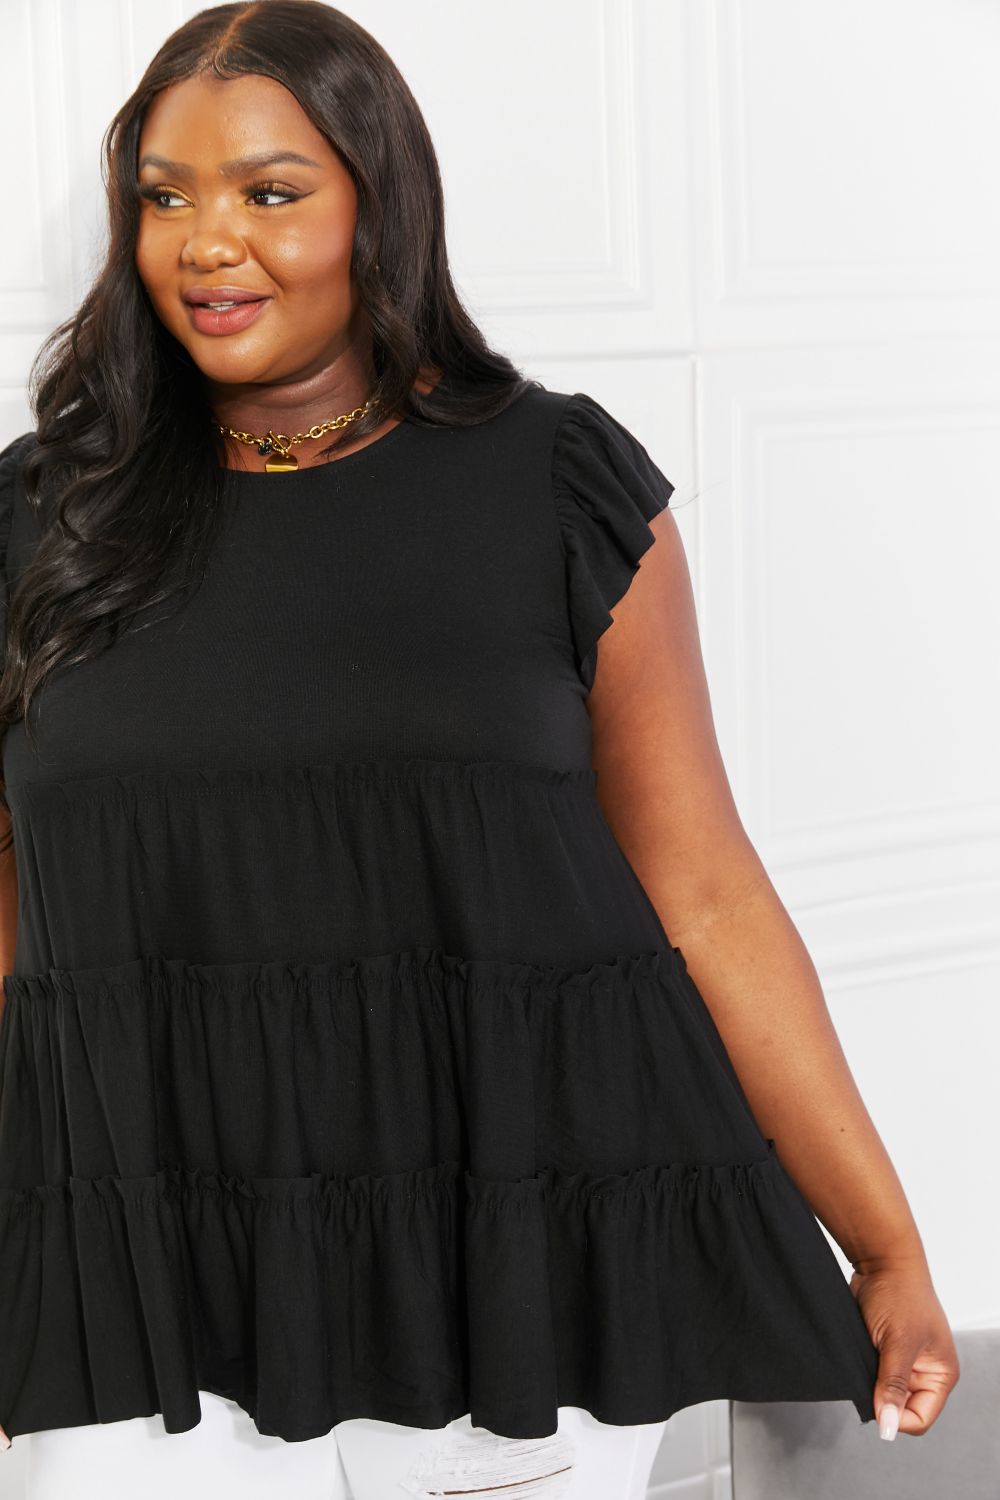 Versatile Black Top: Perfect for Any Occasion